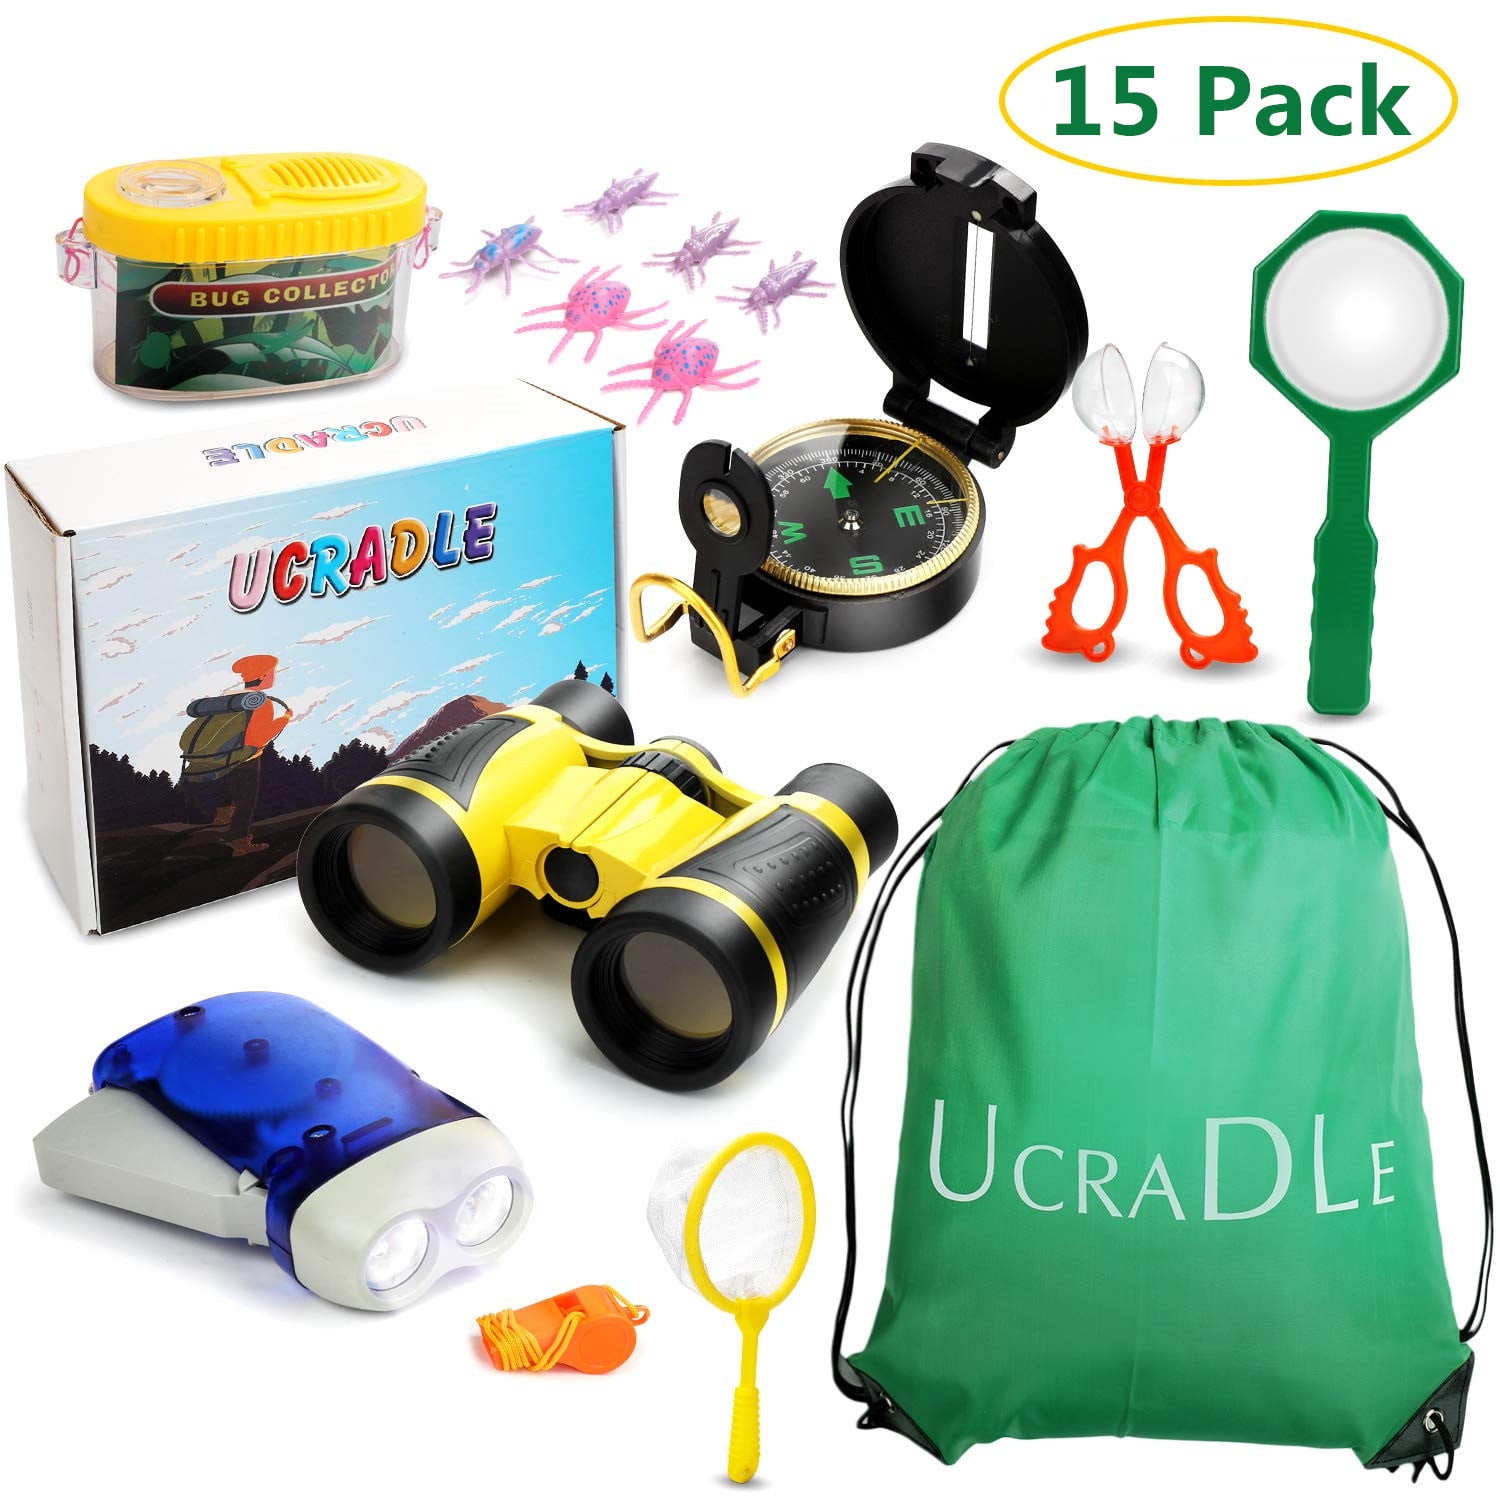 Adventure Outdoor Explorer Kit Toys Included Binocular Bug Catcher Flashlight Compass Magnifying Glass Whistle & Backpack Great Gift for Kids Camping Hiking Educational & Backyard Adventure 22 Pack 